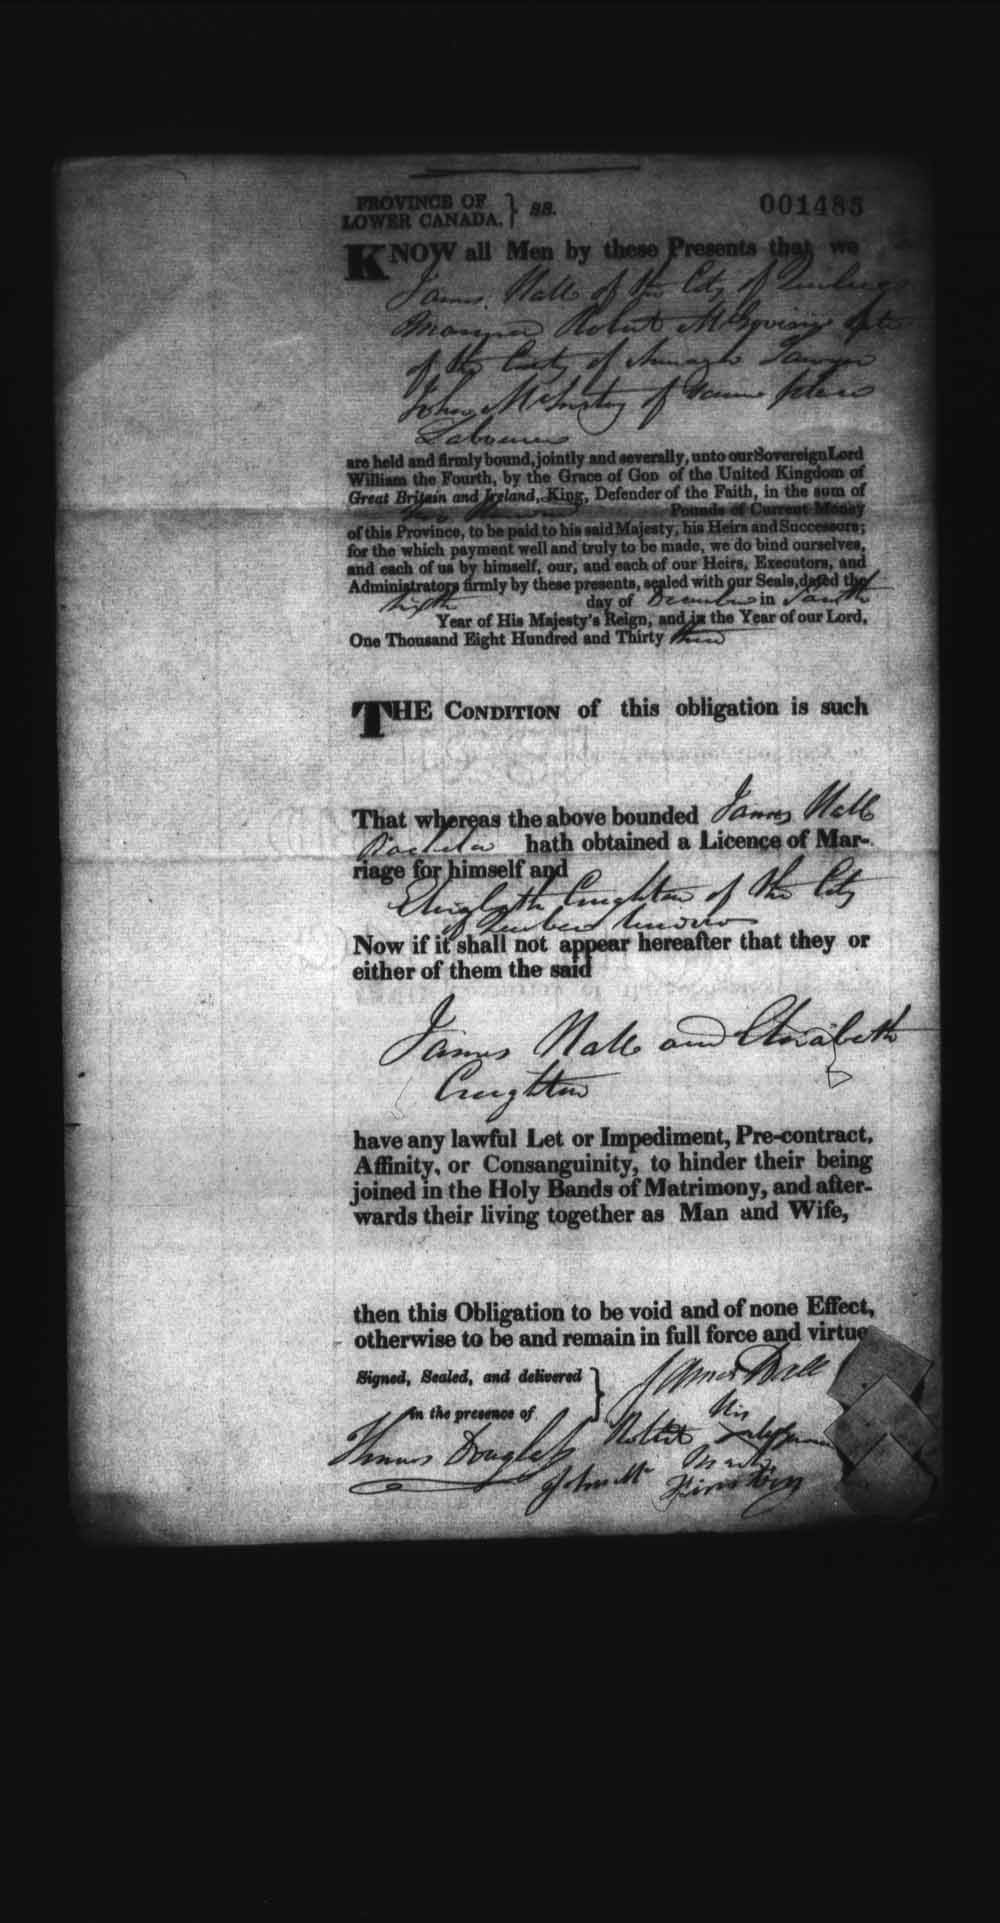 Digitized page of Upper and Lower Canada Marriage Bonds (1779-1865) for Image No.: e008237772